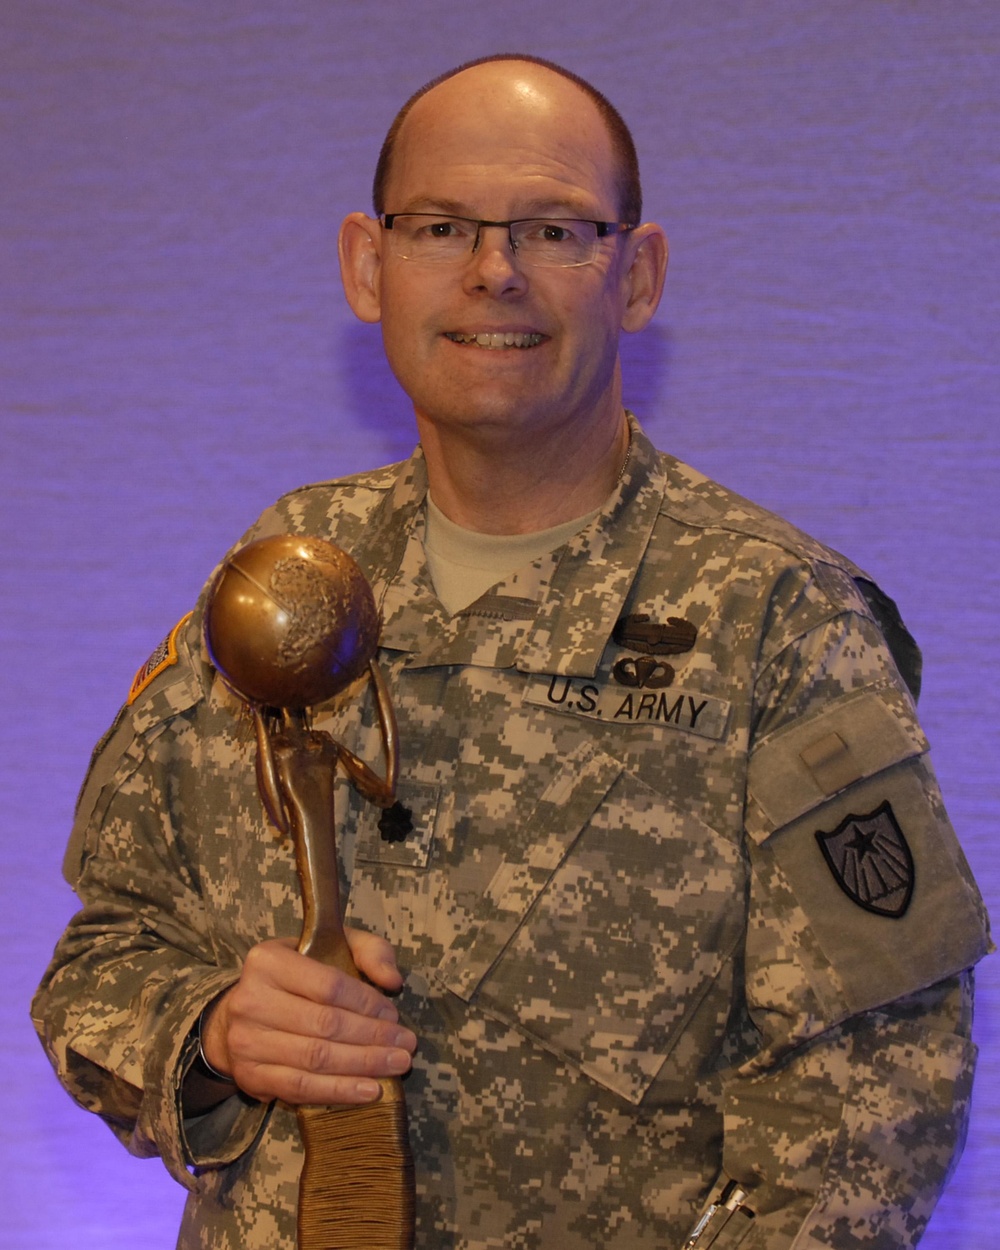 Winds of Change awarded to State Chaplain